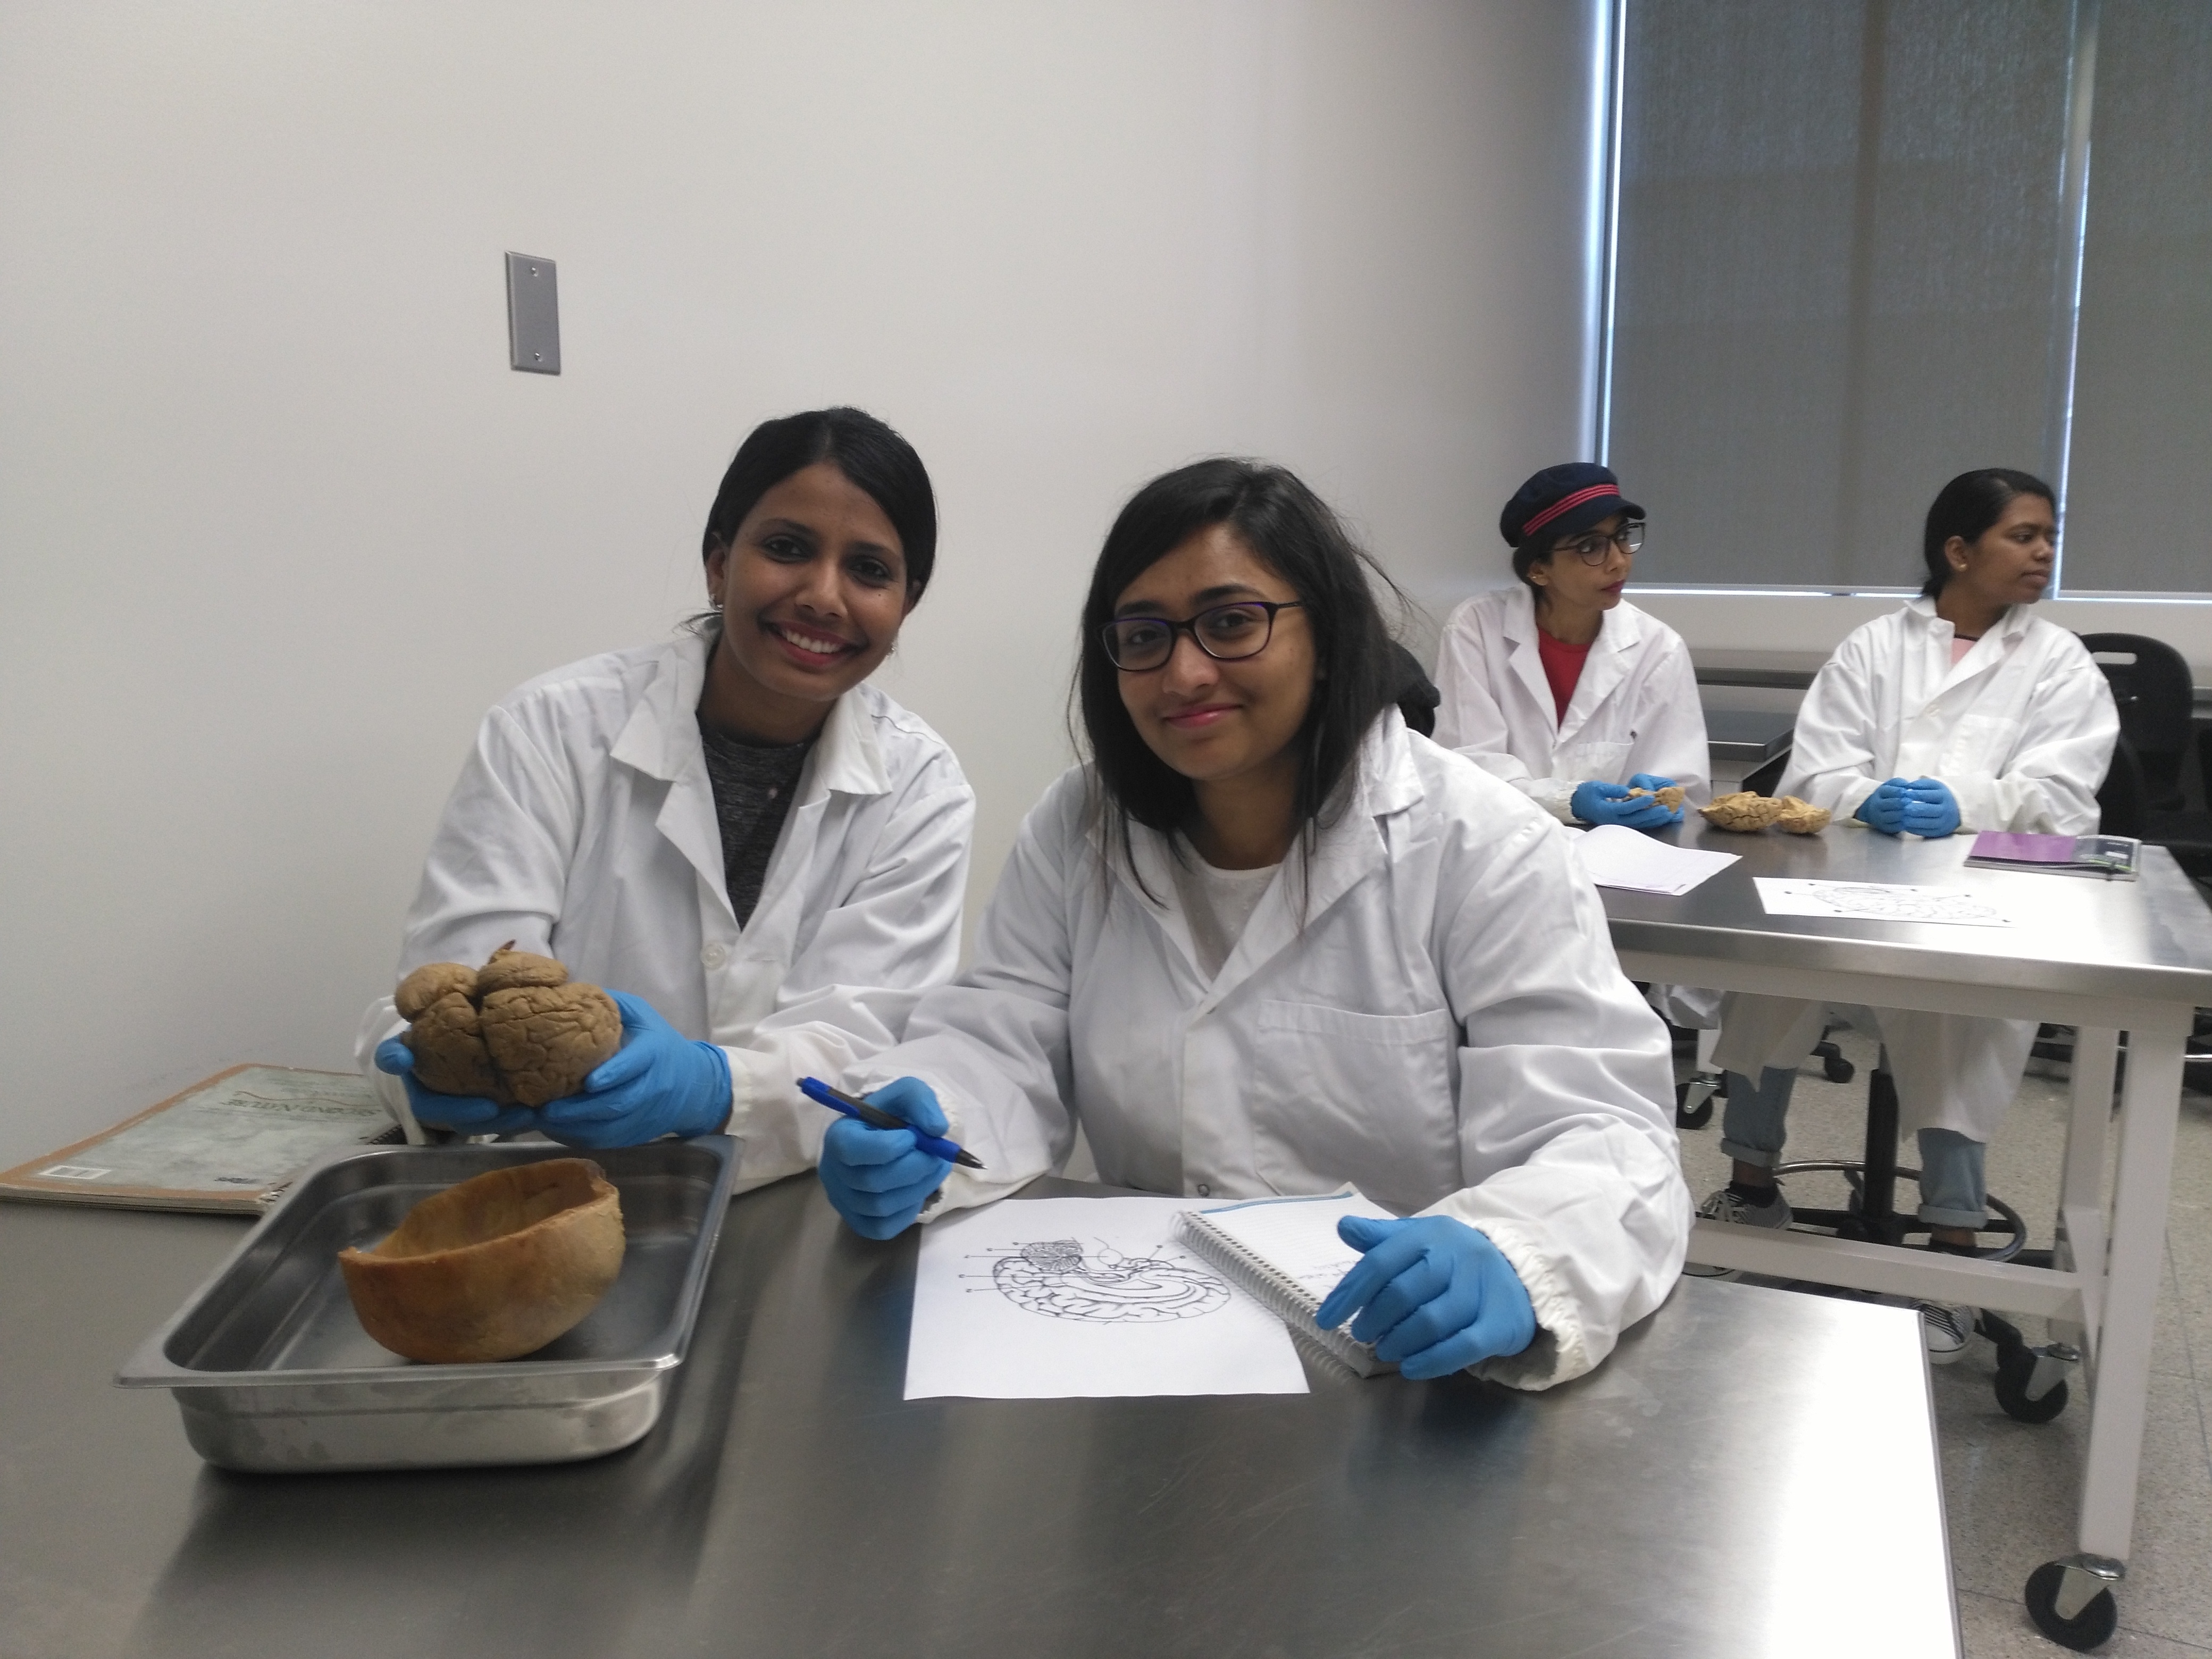 Identifying parts of the human brain at the Human Anatomy Lab of Schulich School of Medicine & Dentistry - Windsor Campus (June 27, 2019)